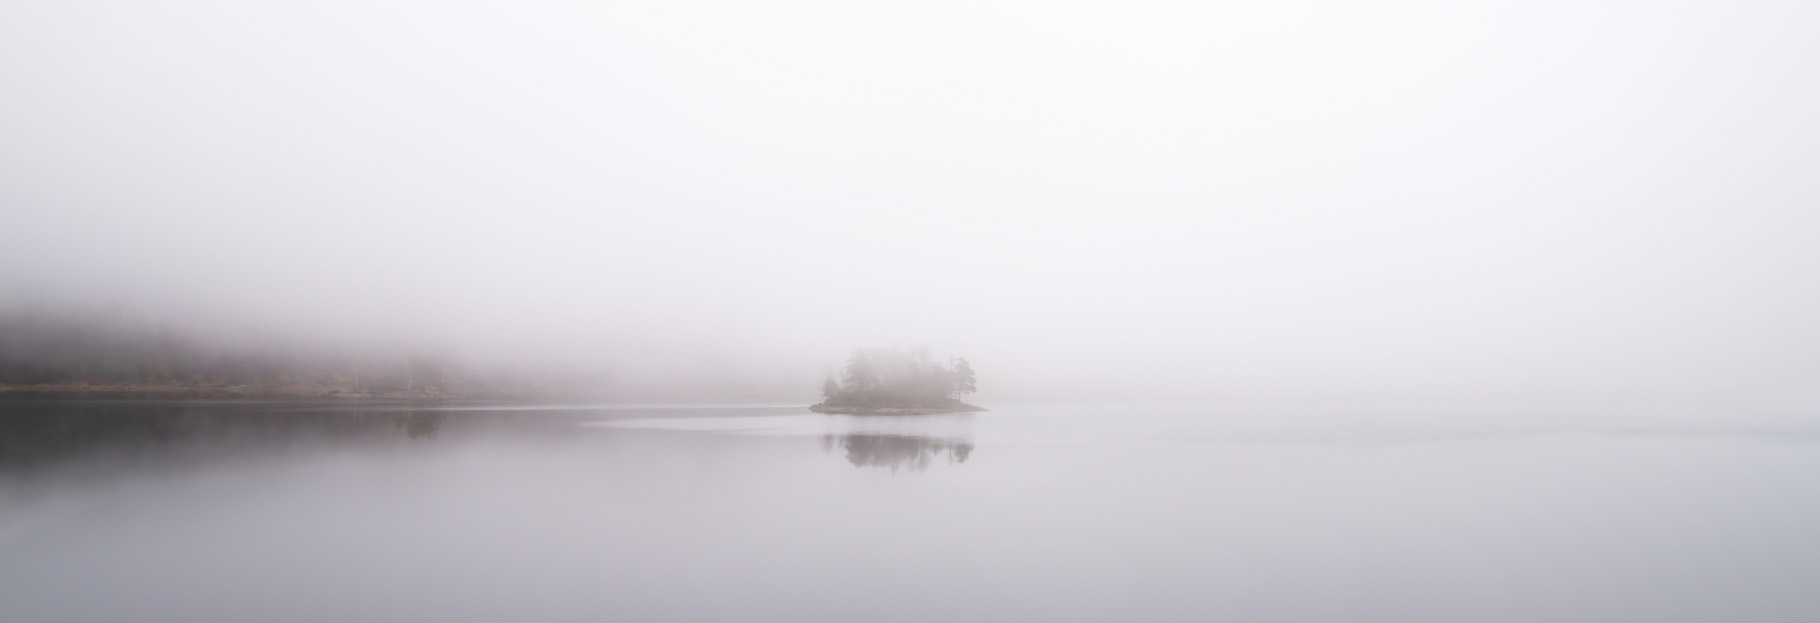 Northern Sweden in foggy environment